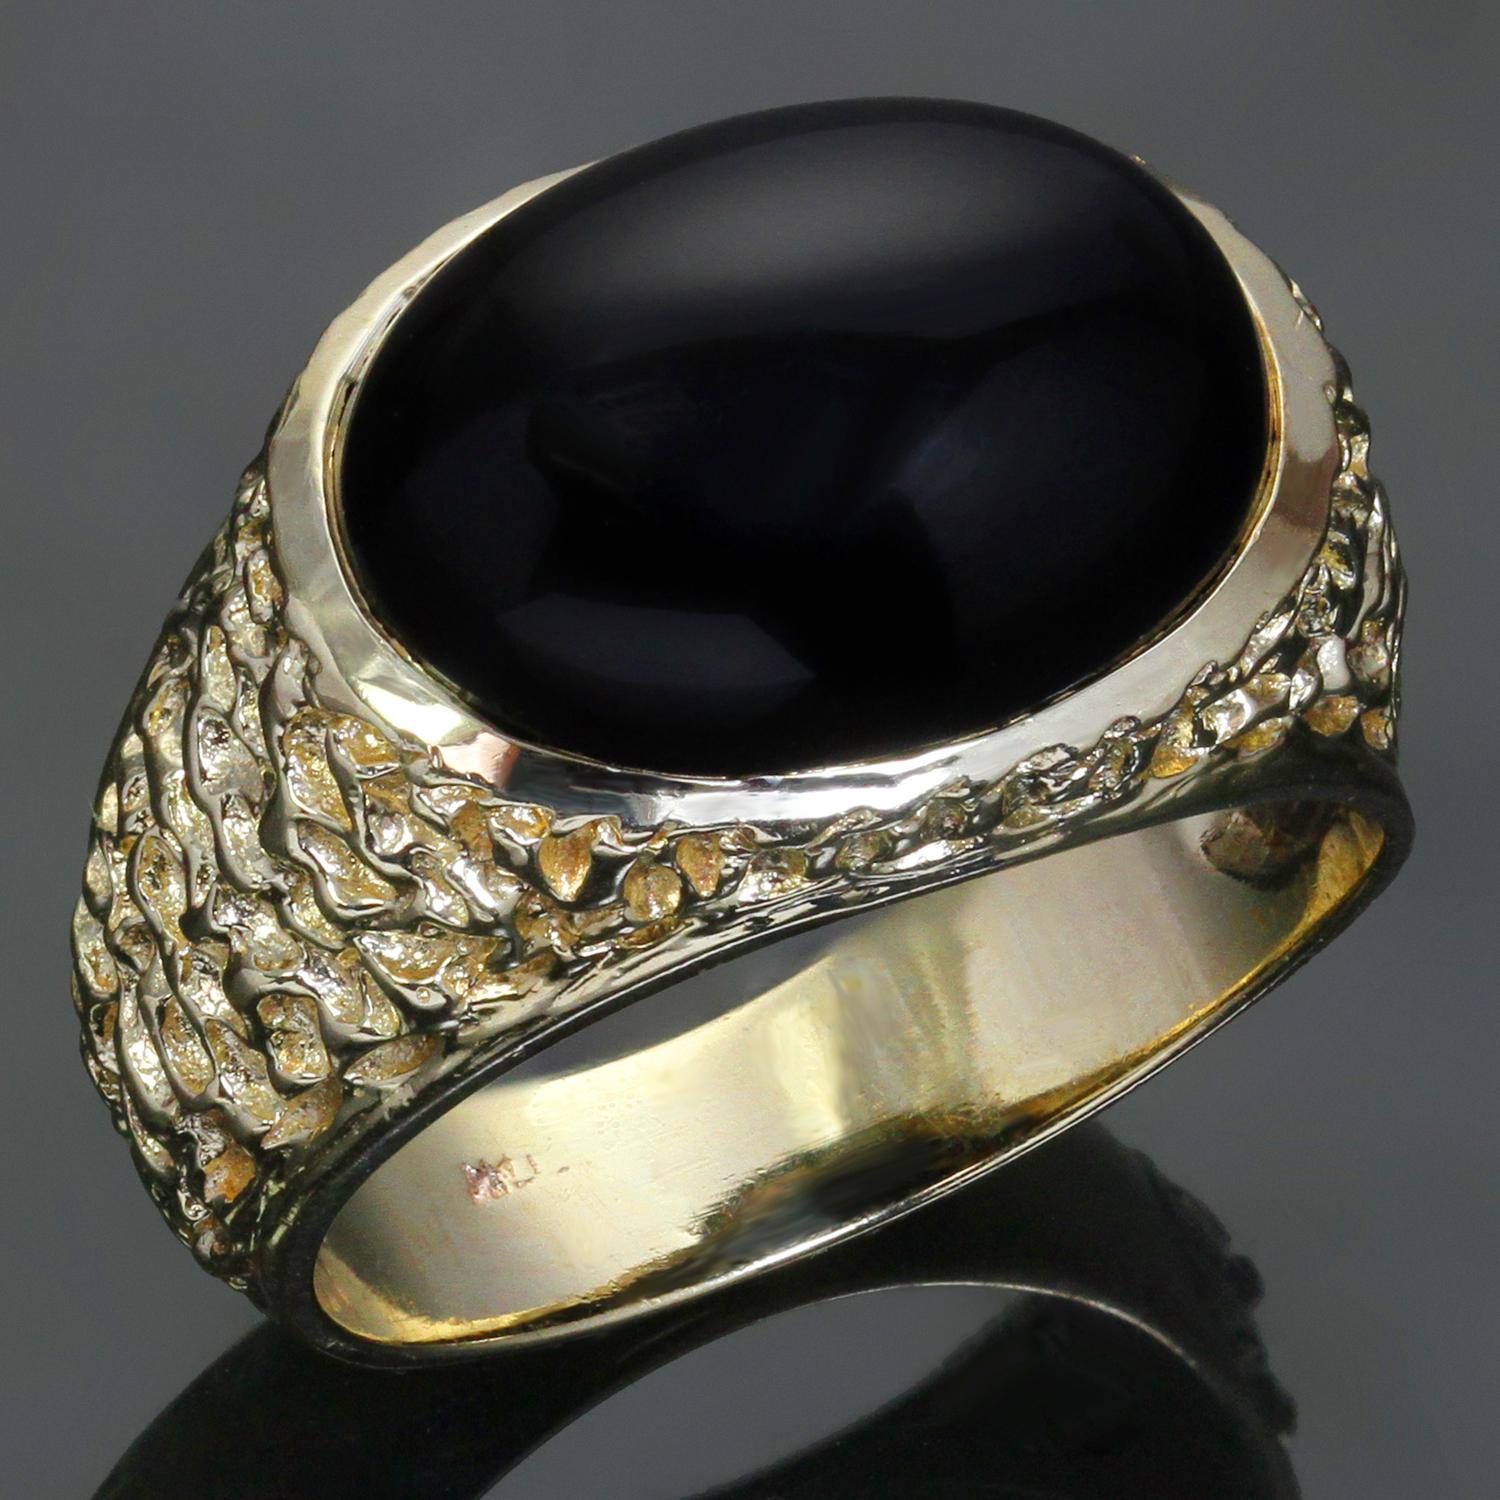 This classic estate men's ring features a large oval black onyx stone set in nugget-textured 14k yellow gold. Made in United States circa 1970s. Measurements: 0.70